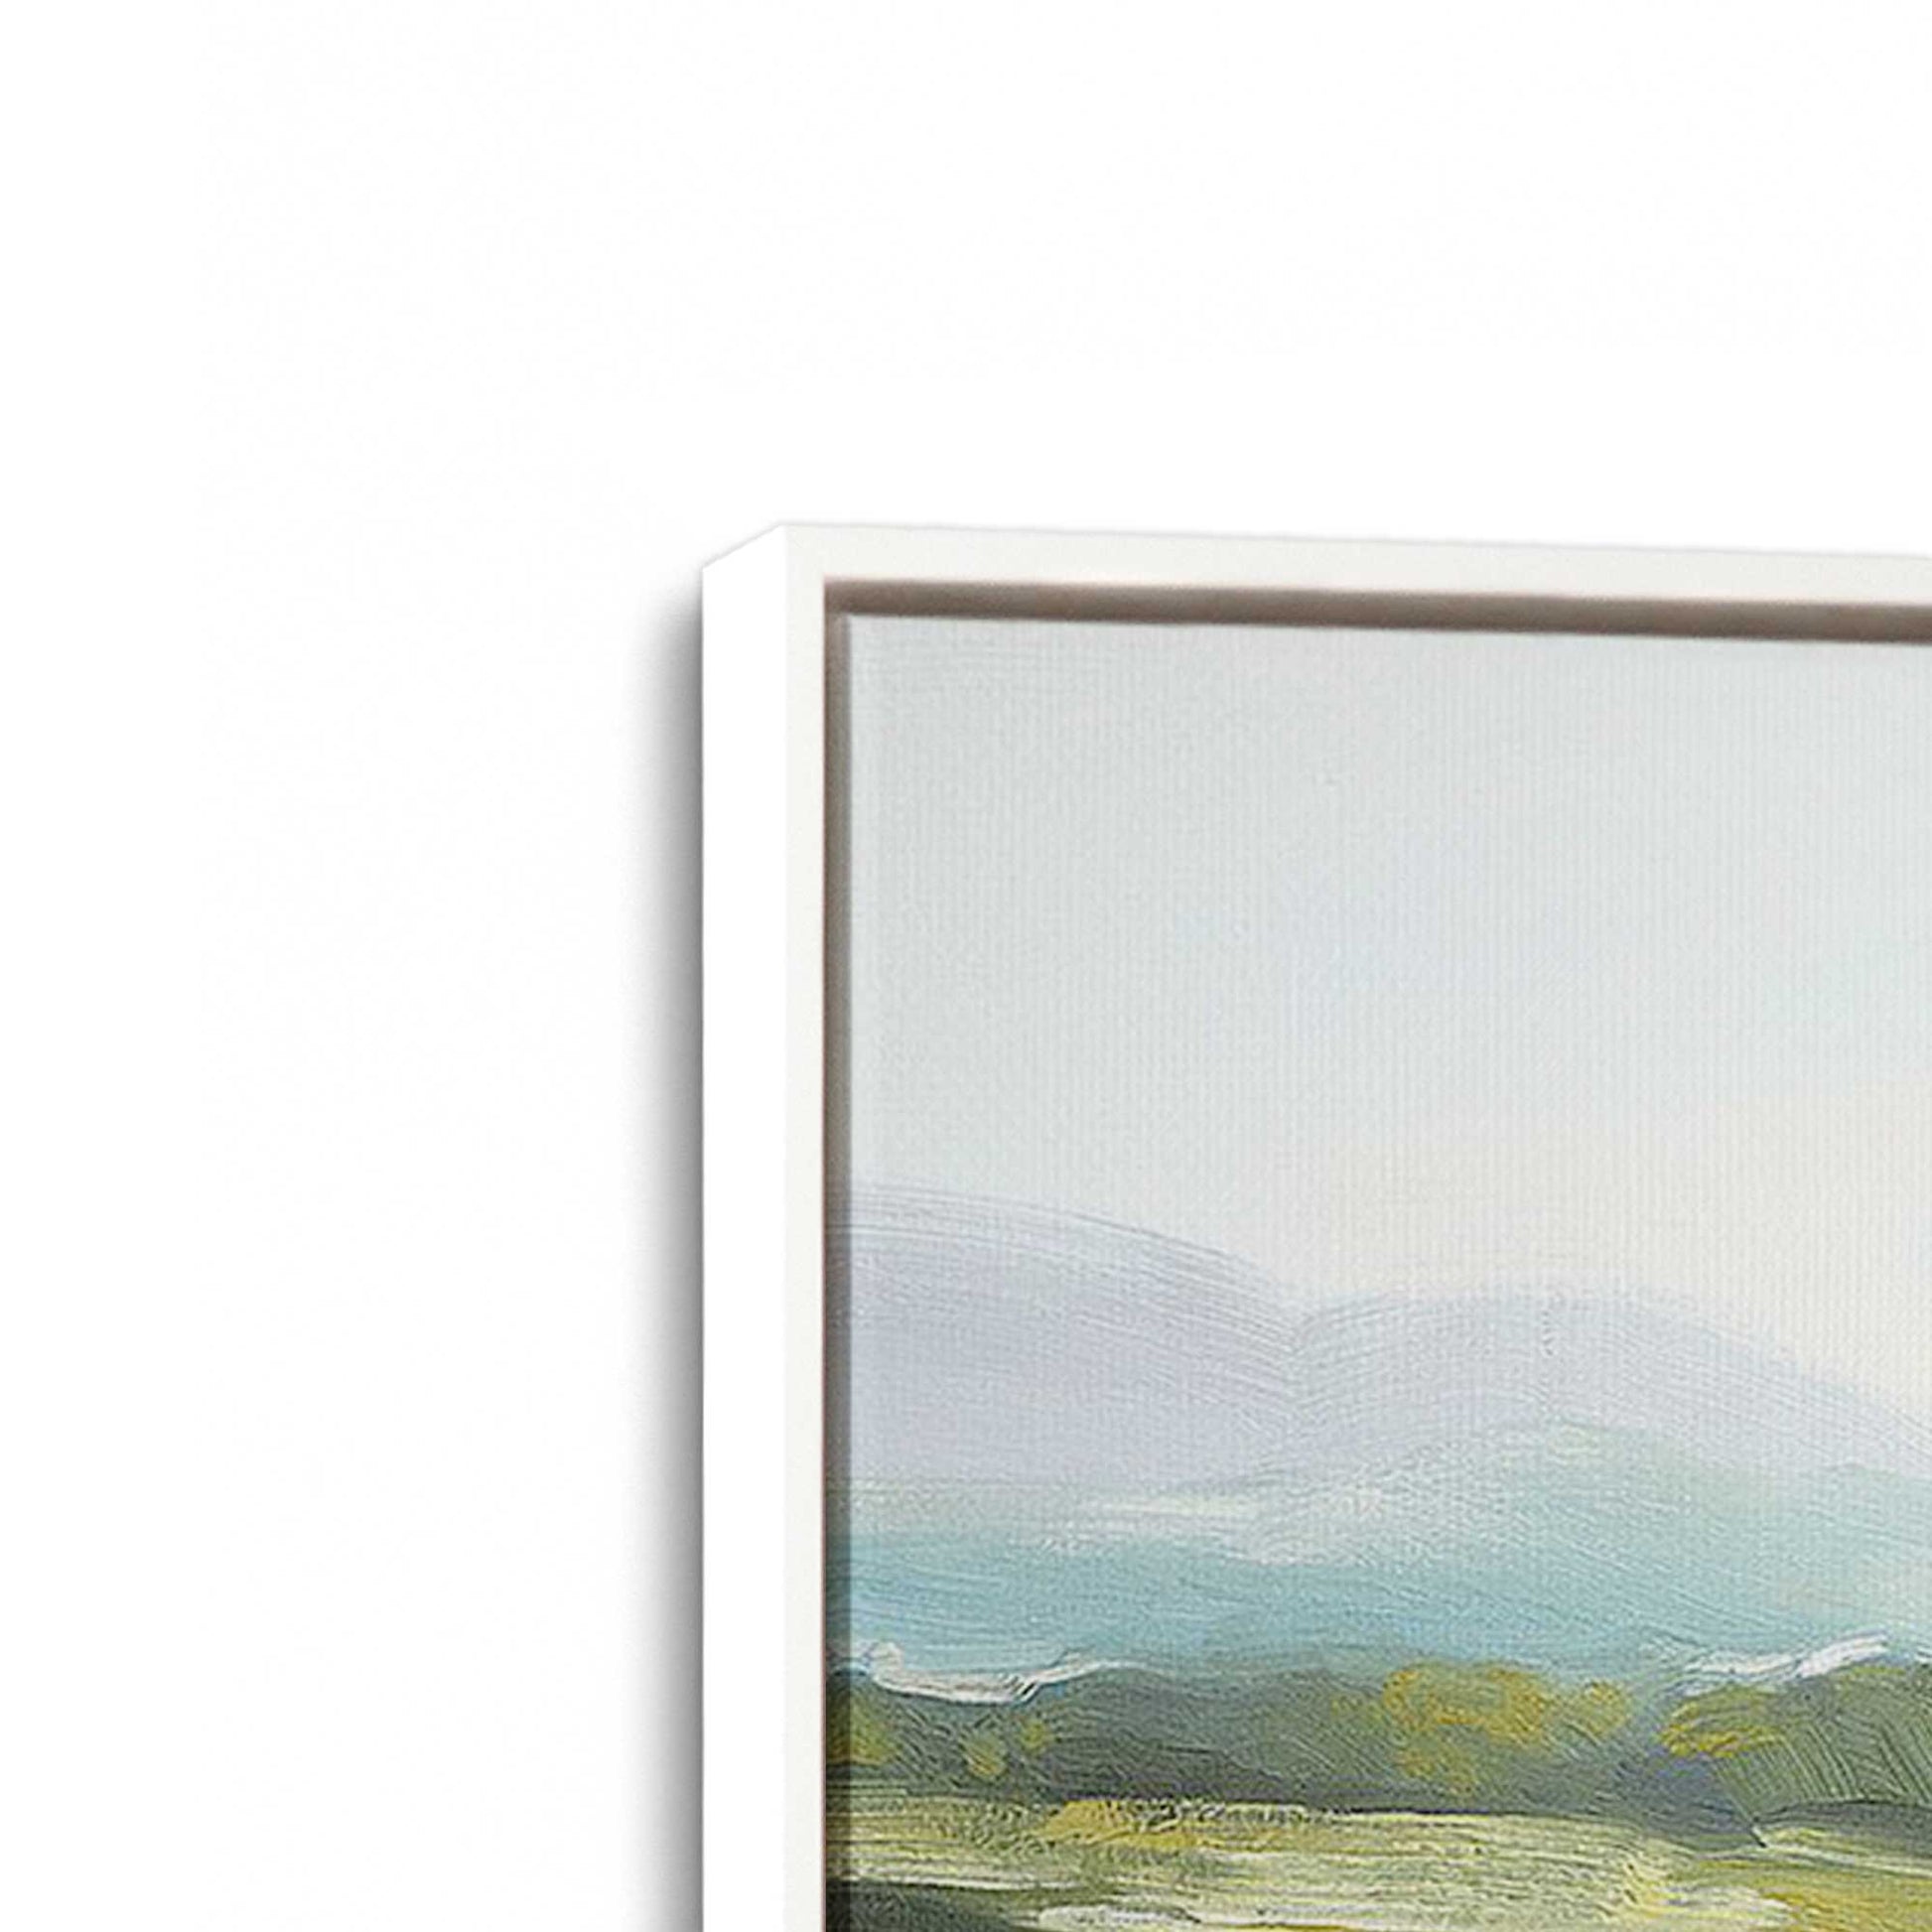 [Color:White], Picture of art in a White frame at an angle